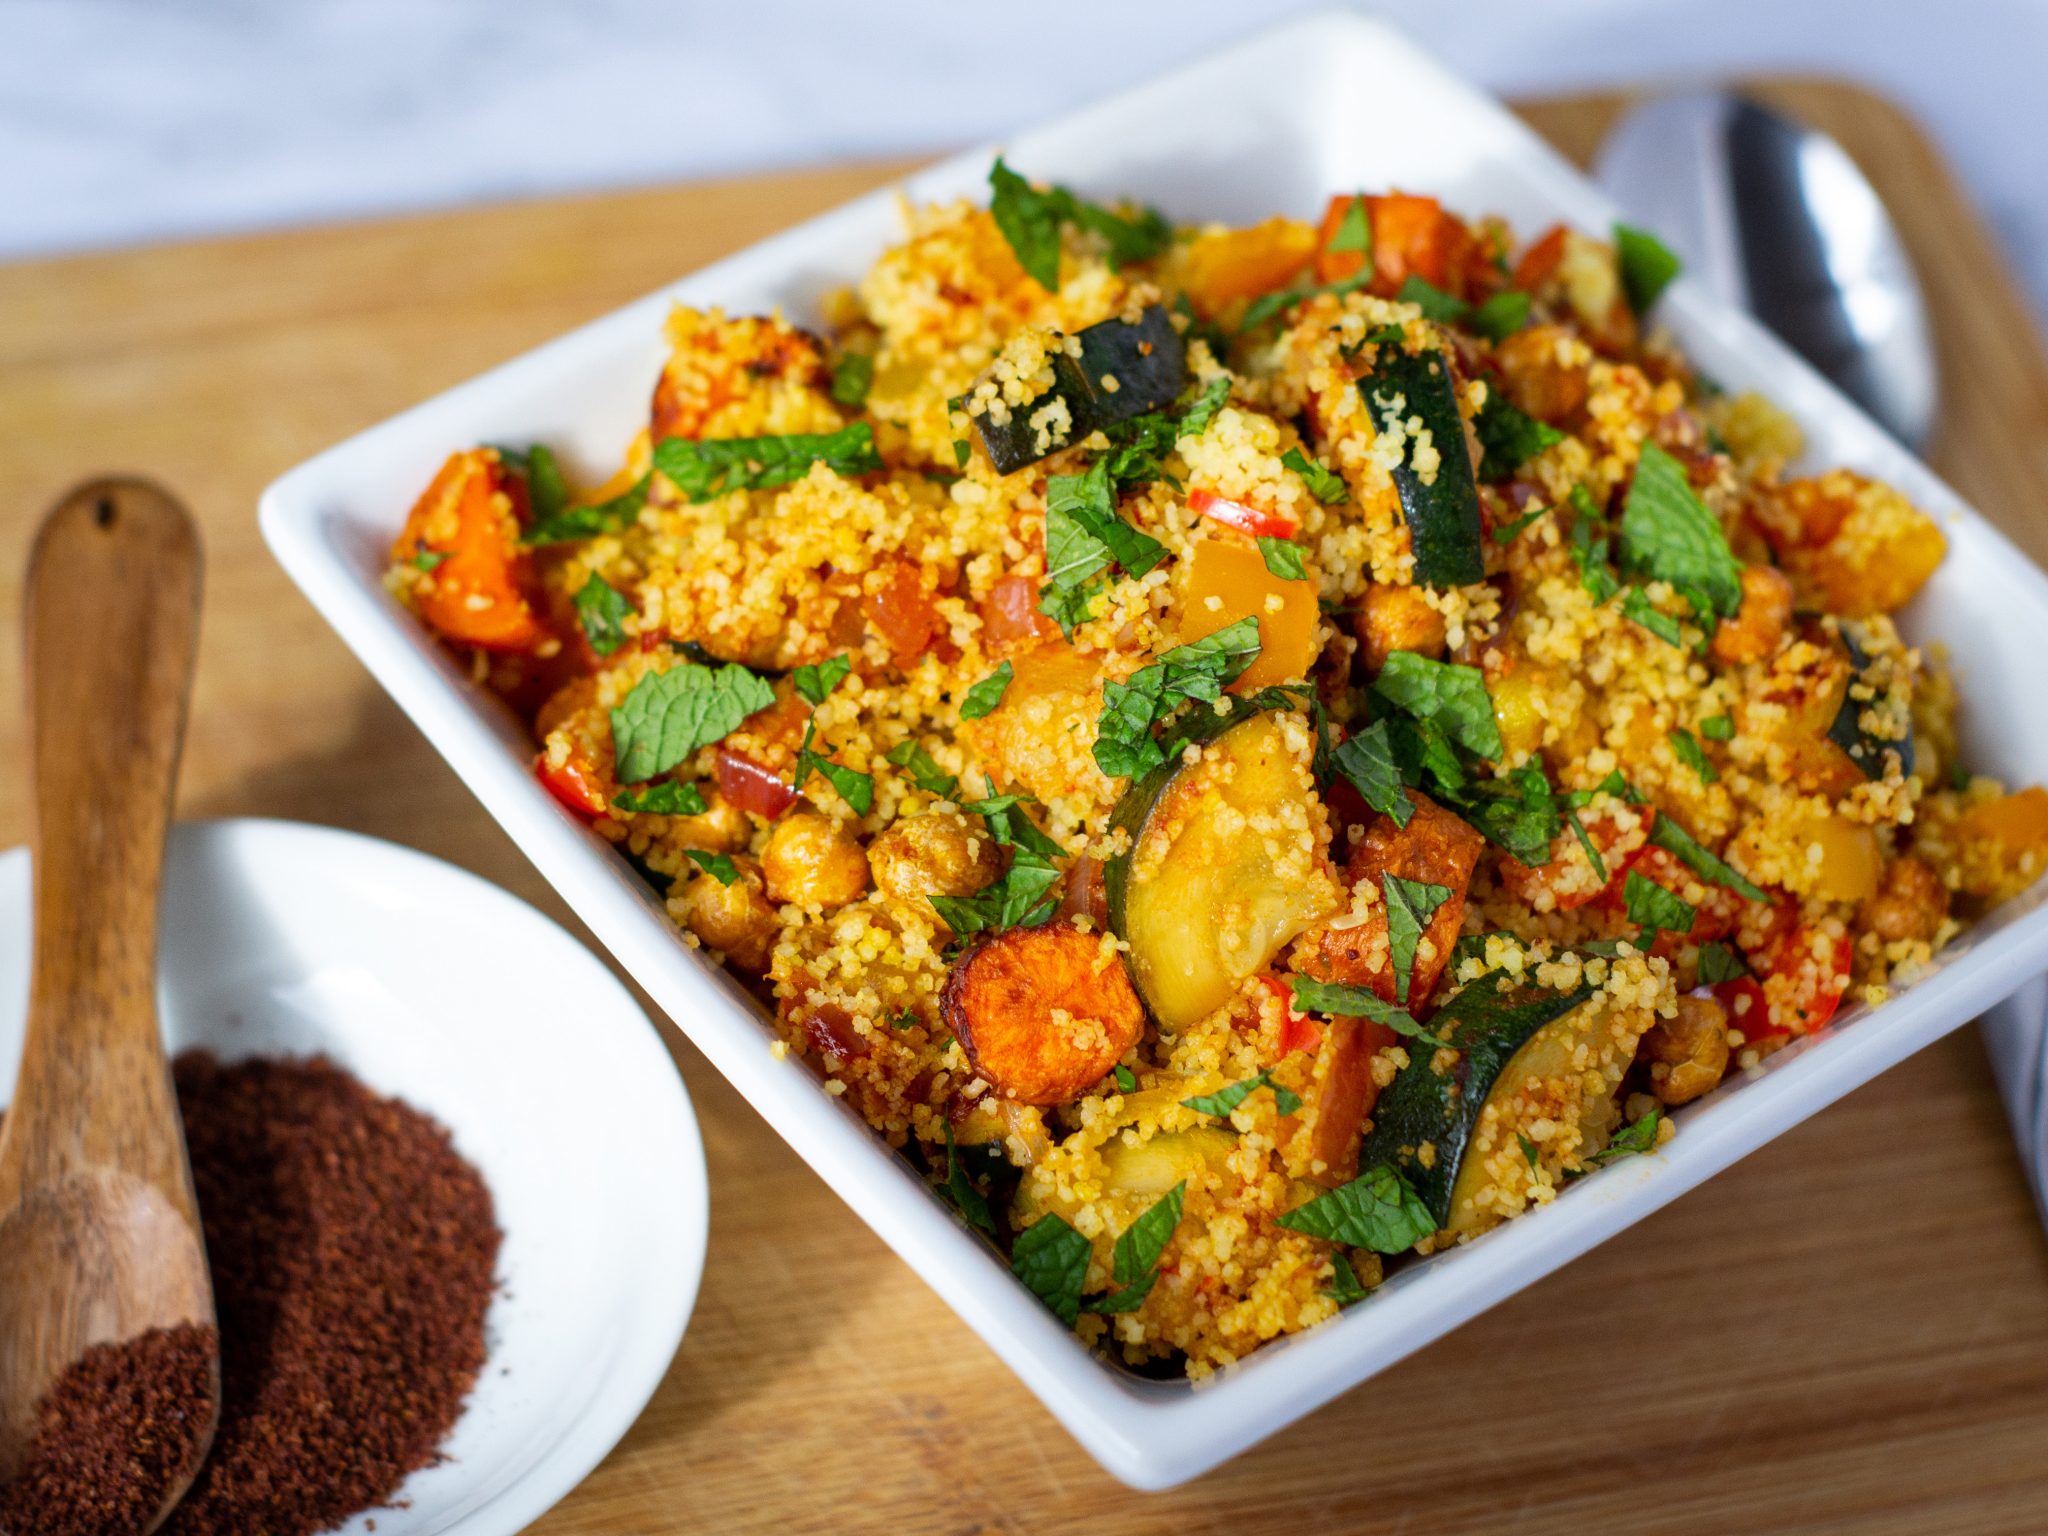 Moroccan Couscous with Roasted Vegetables | GradFood